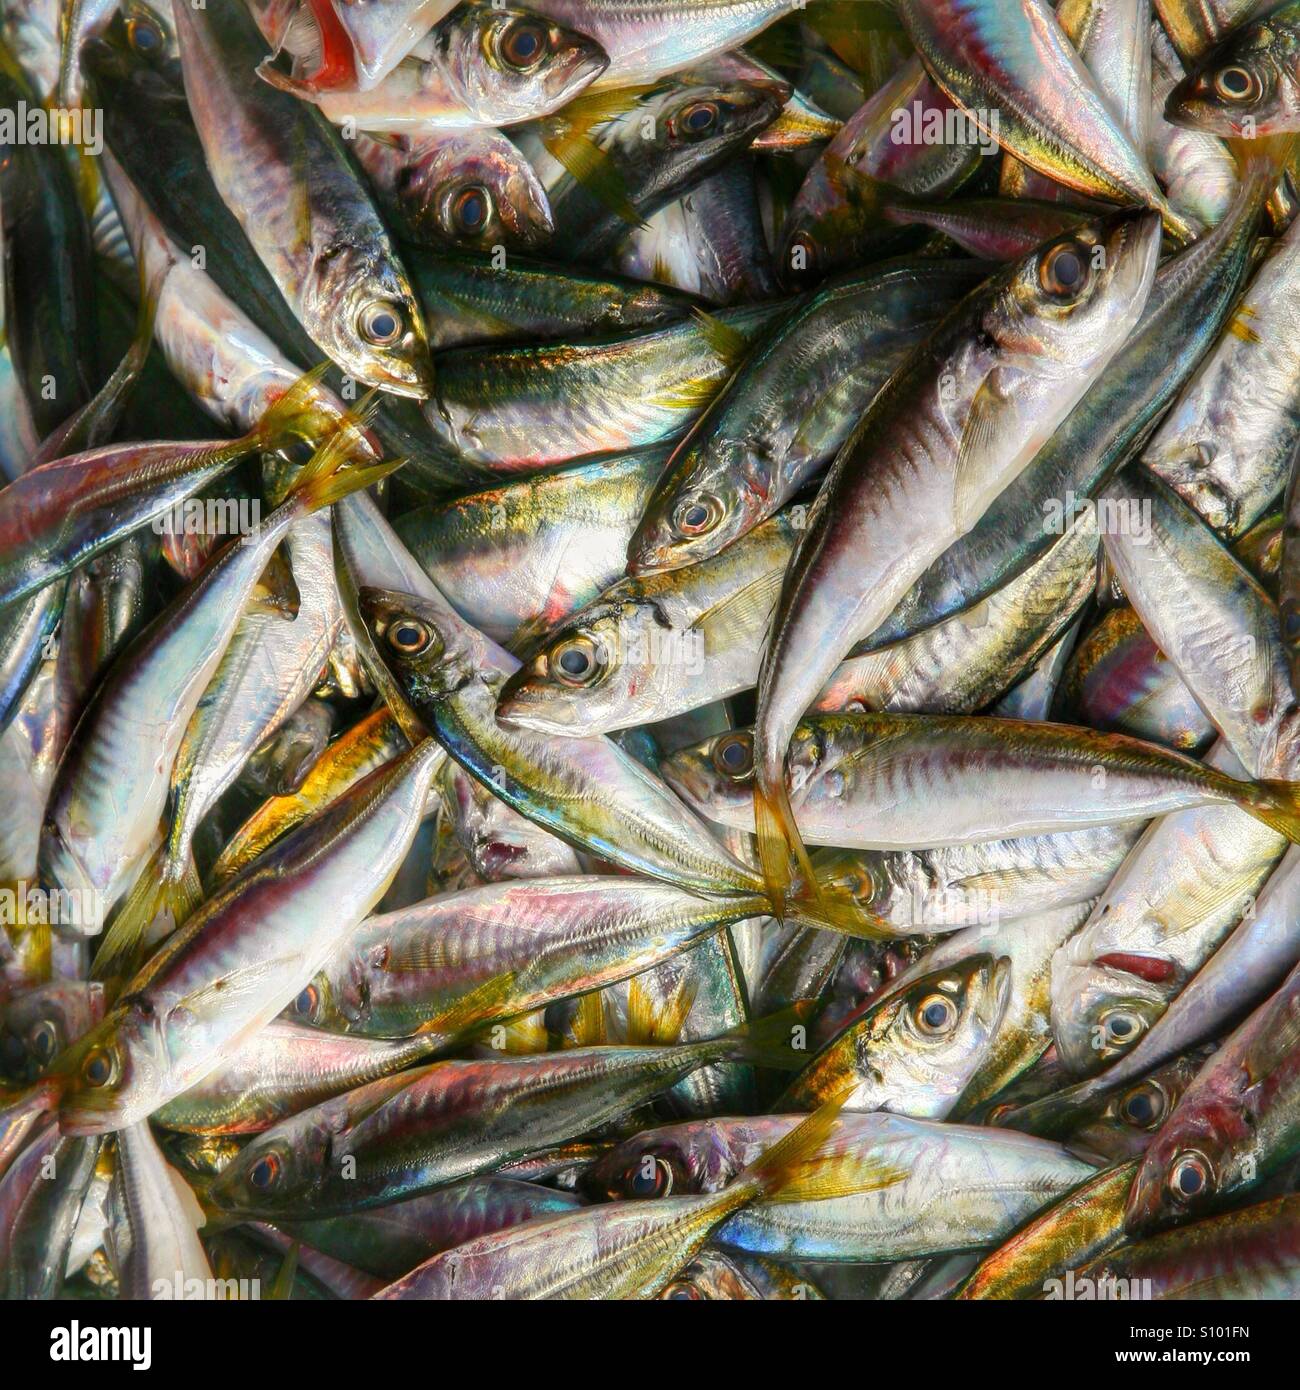 Freshly caught brightly coloured fish Stock Photo